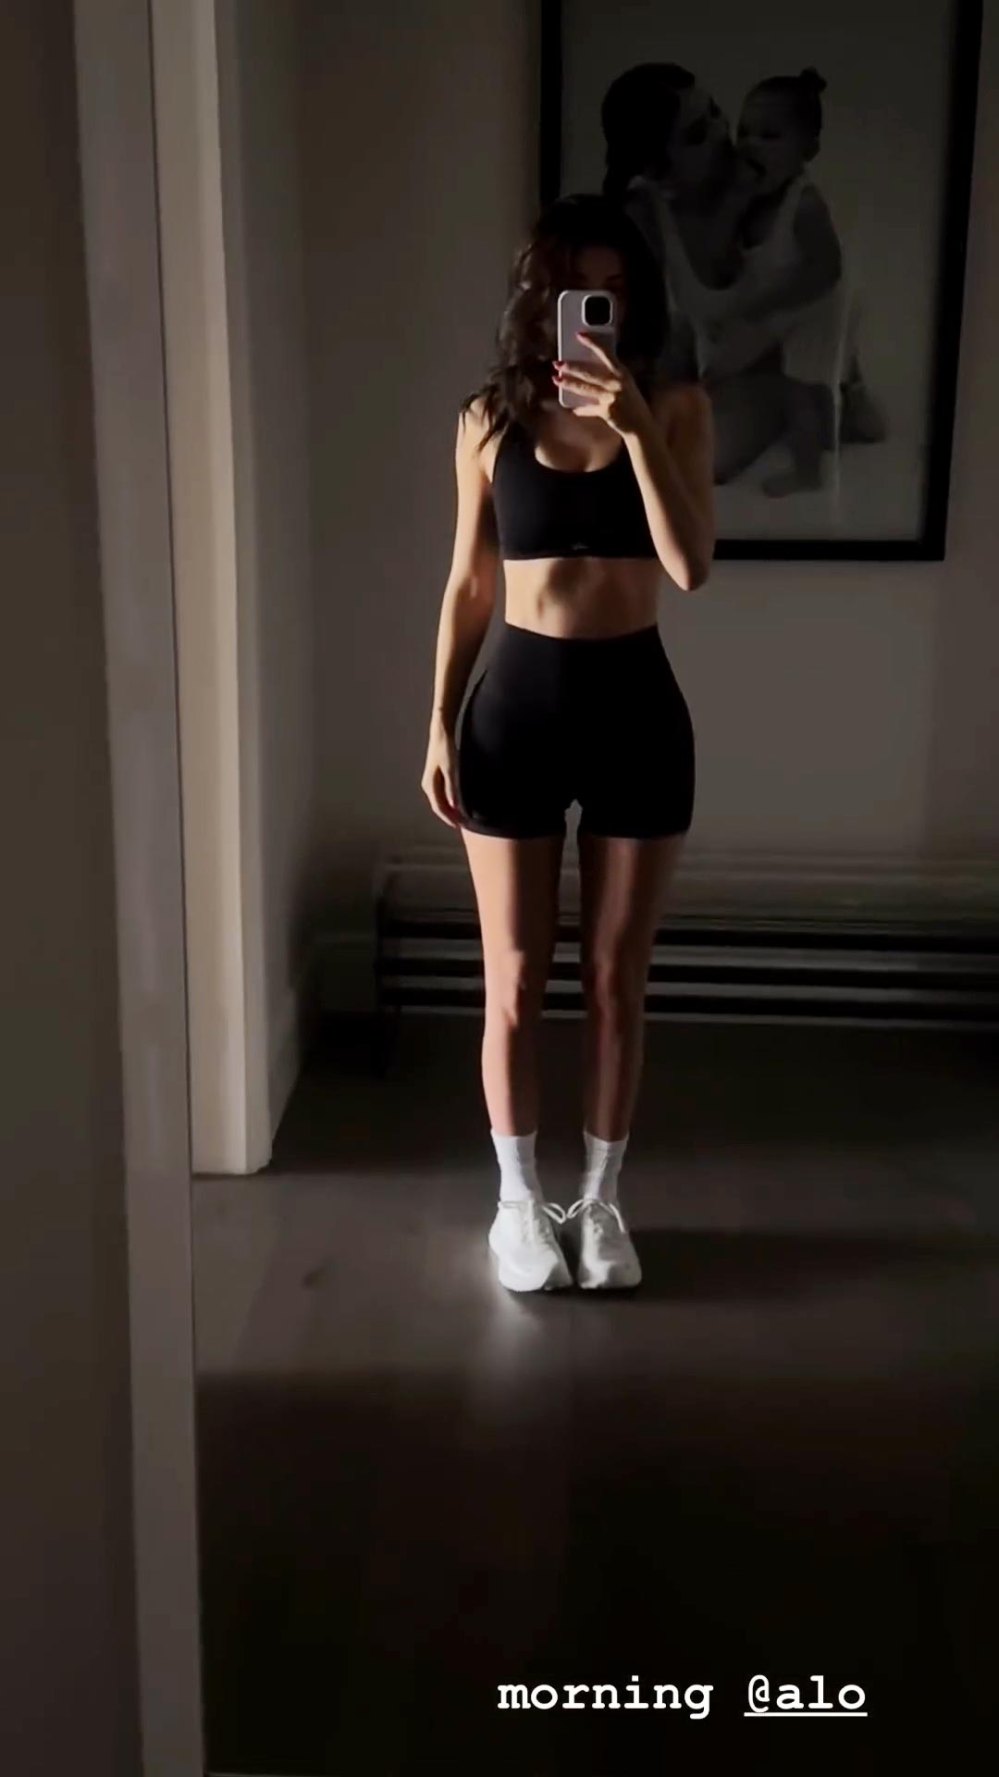 Kylie Jenner shows off her trim and sculpted figure in black Alo